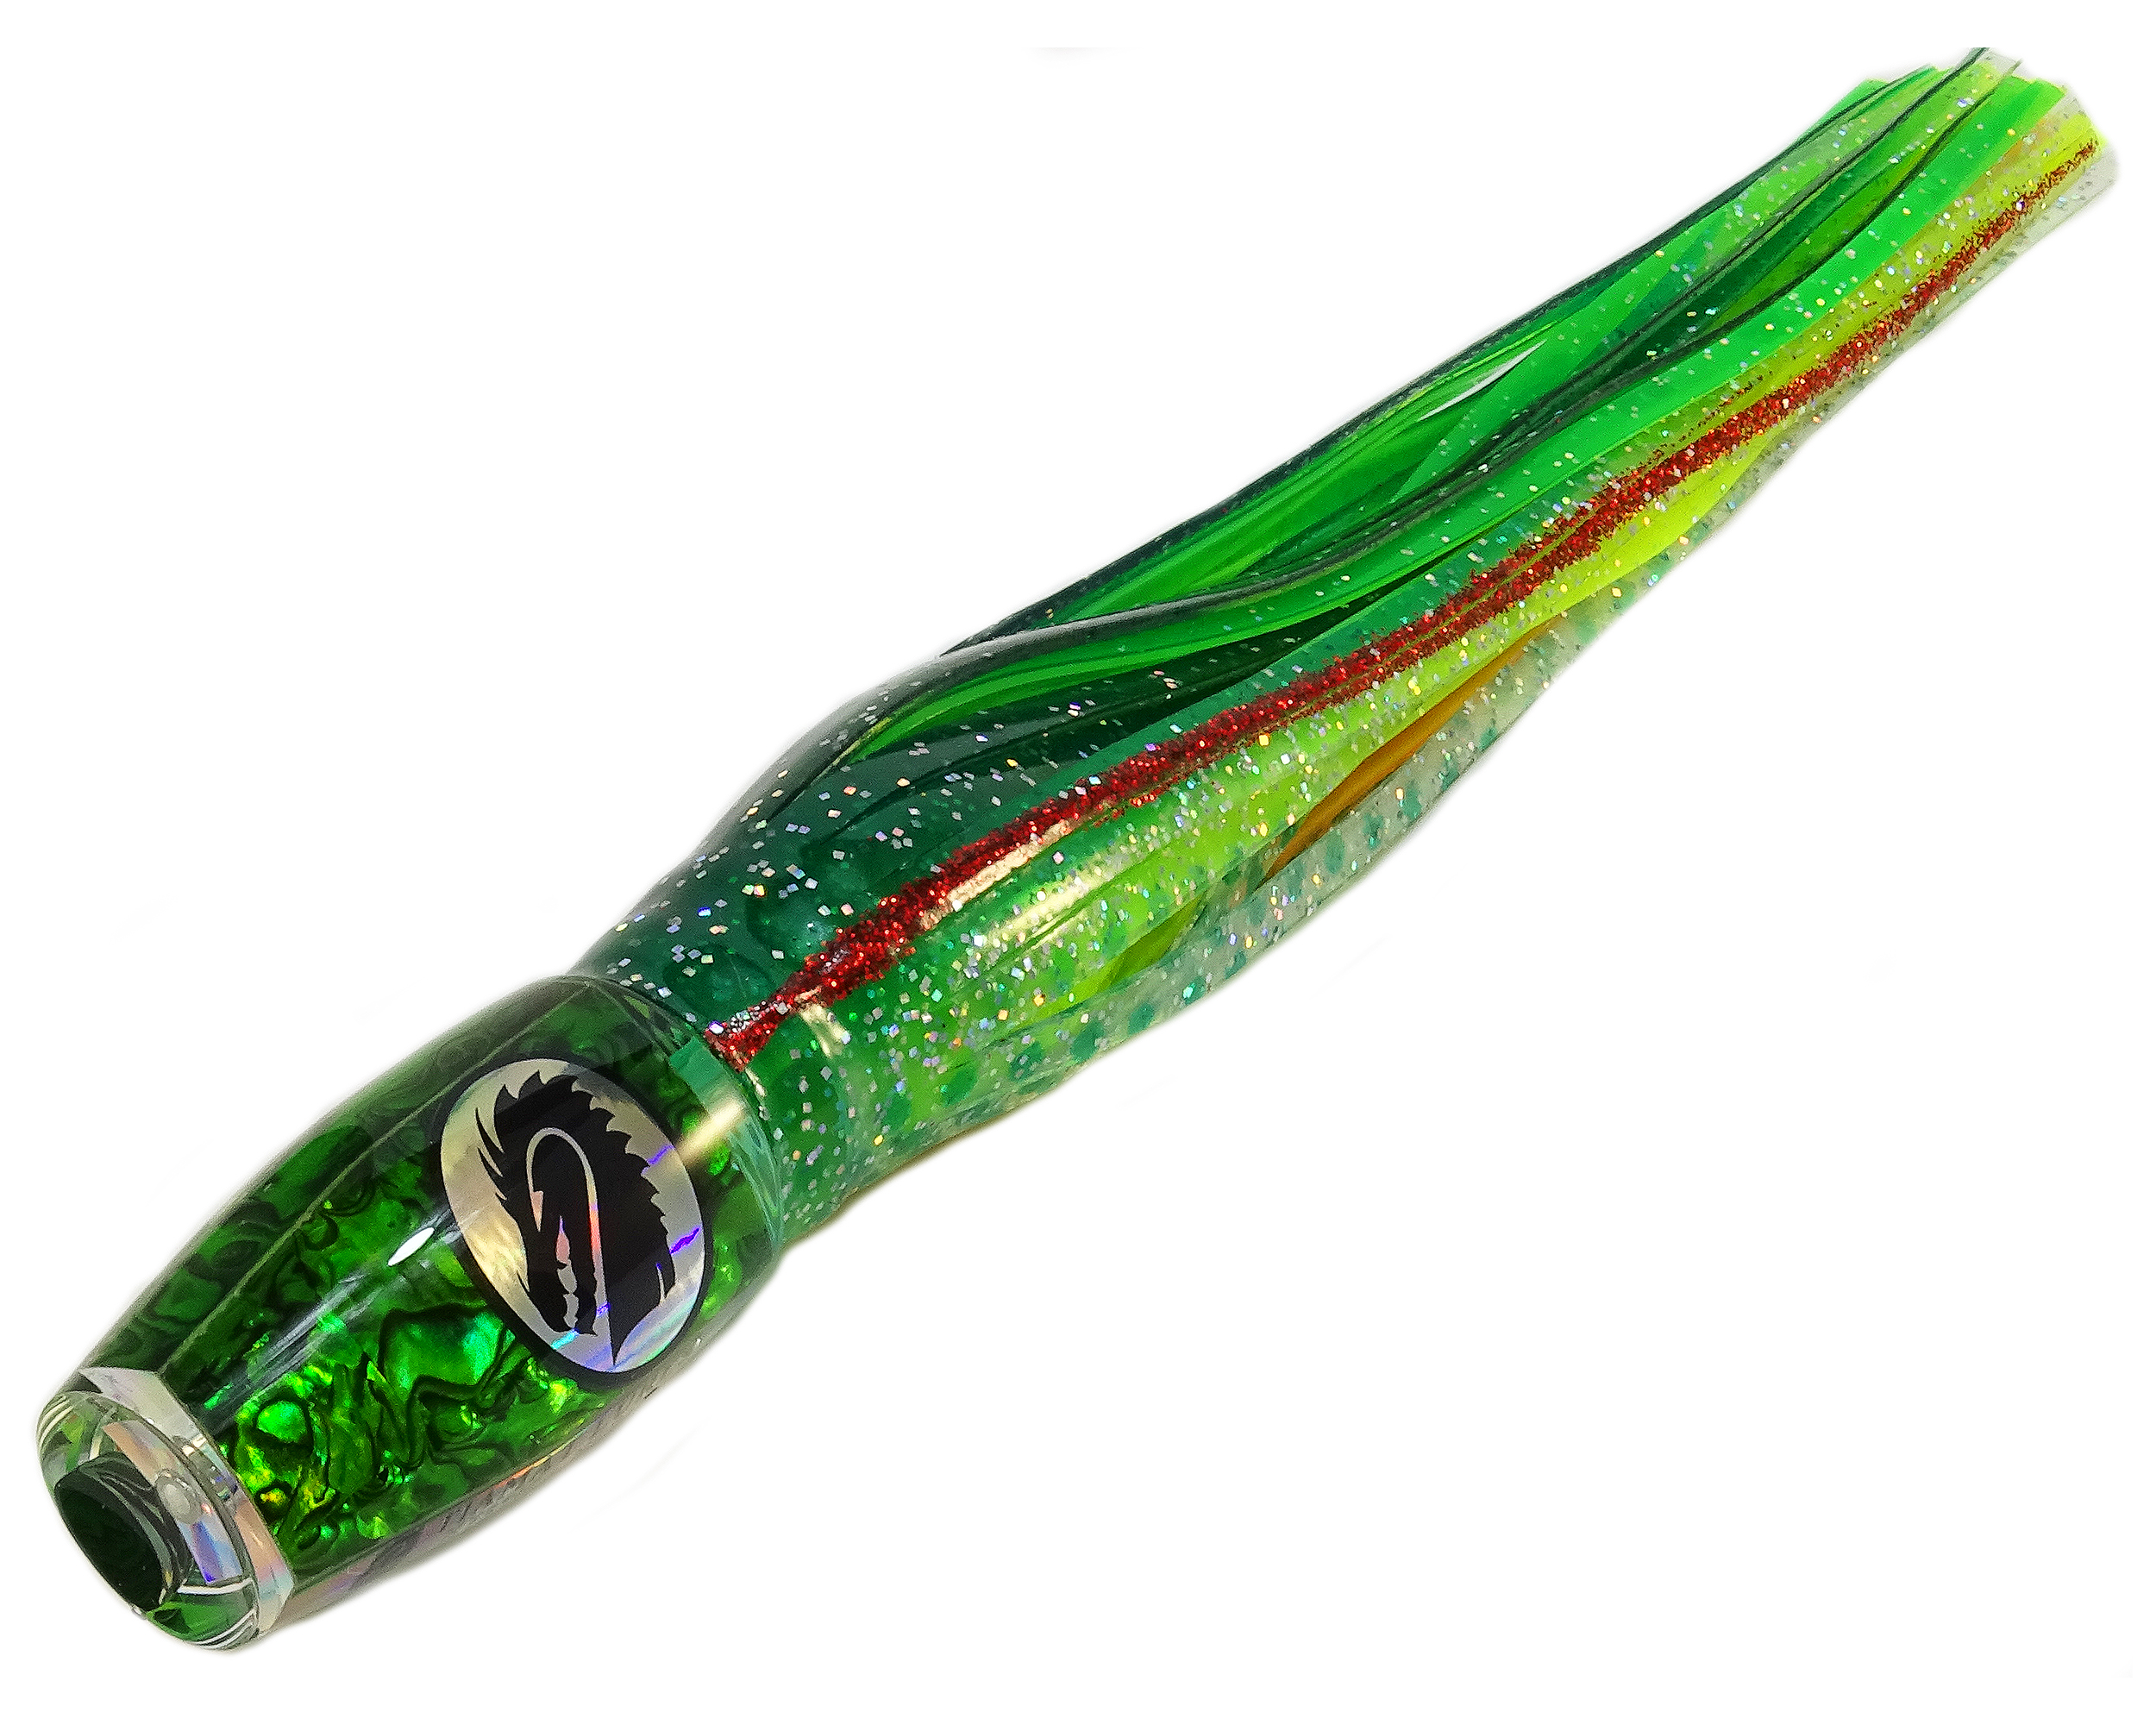 Mystic is an excellent choice for anglers of any level of